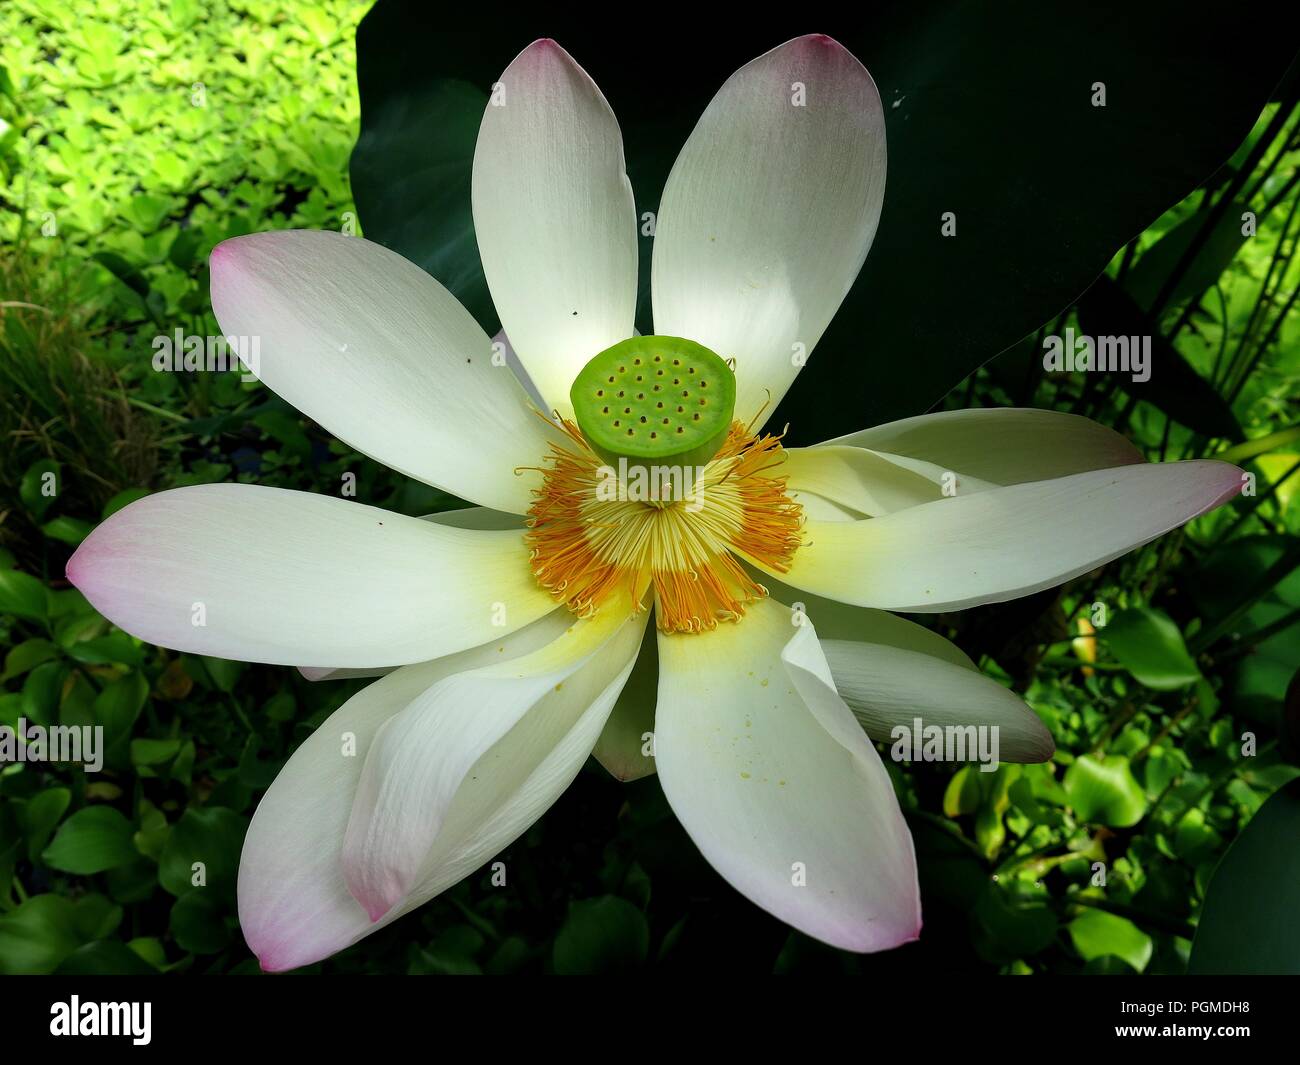 Huge lotus flower with green seed pod. Stock Photo